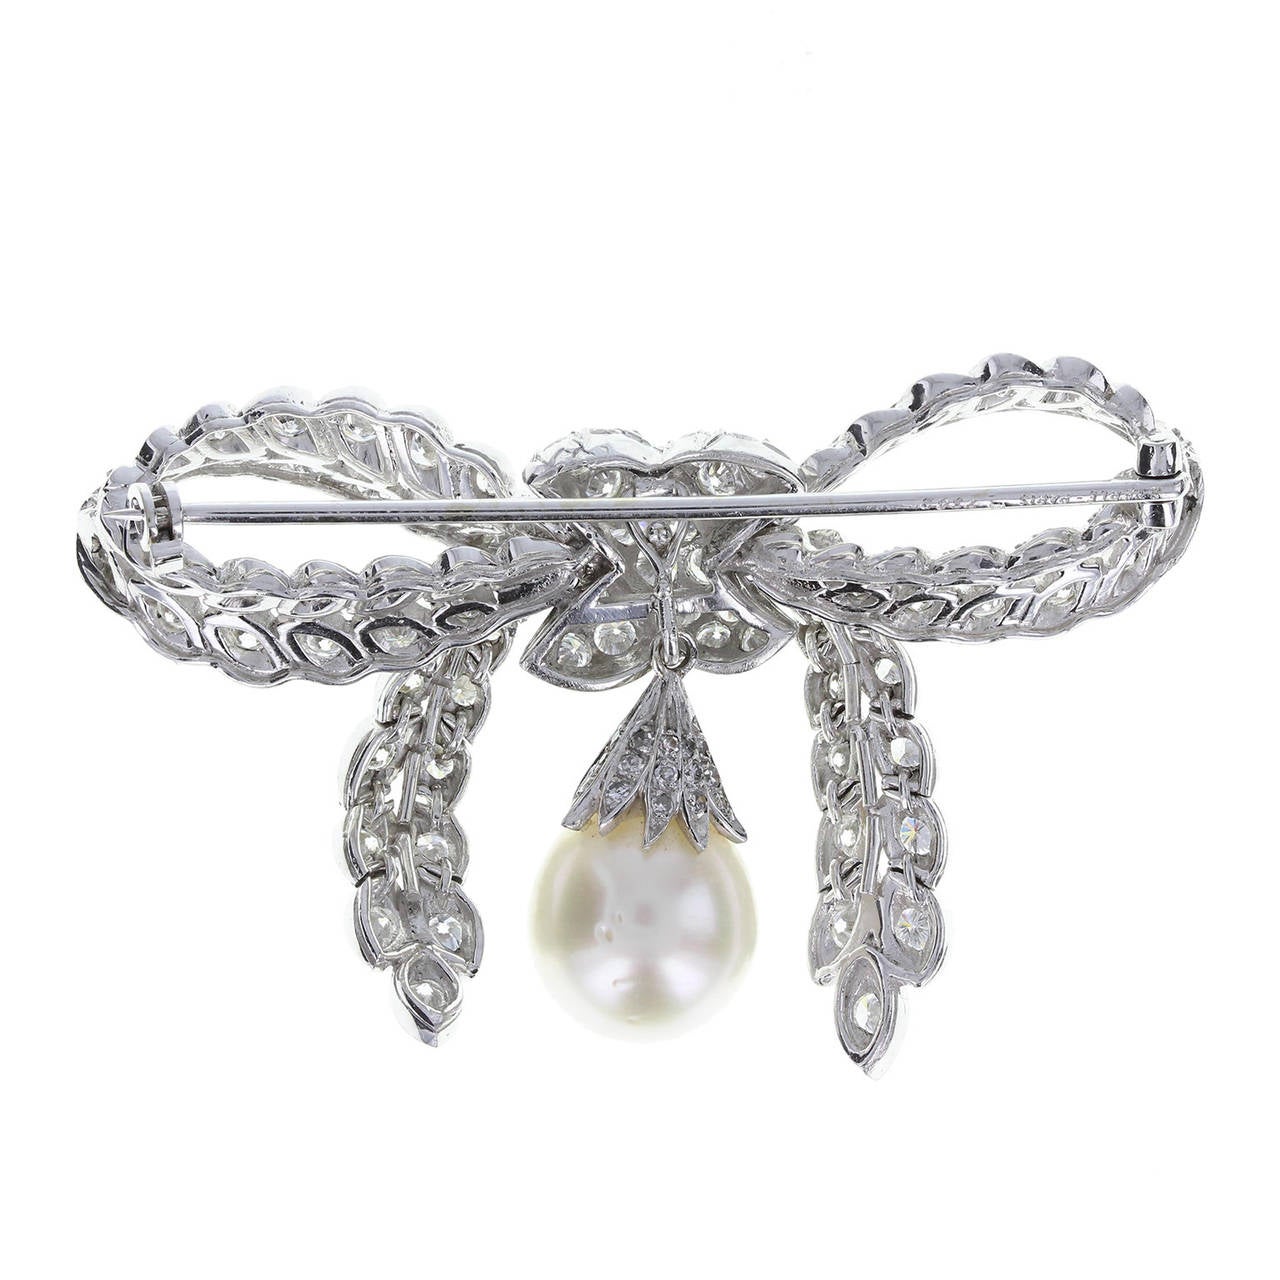 Exquisitely crafted in platinum, each brilliant-cut diamond set it it's own marquise shaped setting. The tails of the bow are articulated and move fluidly when worn. A single cultured pearl hangs from the centre knot of the bow. Total diamond carat